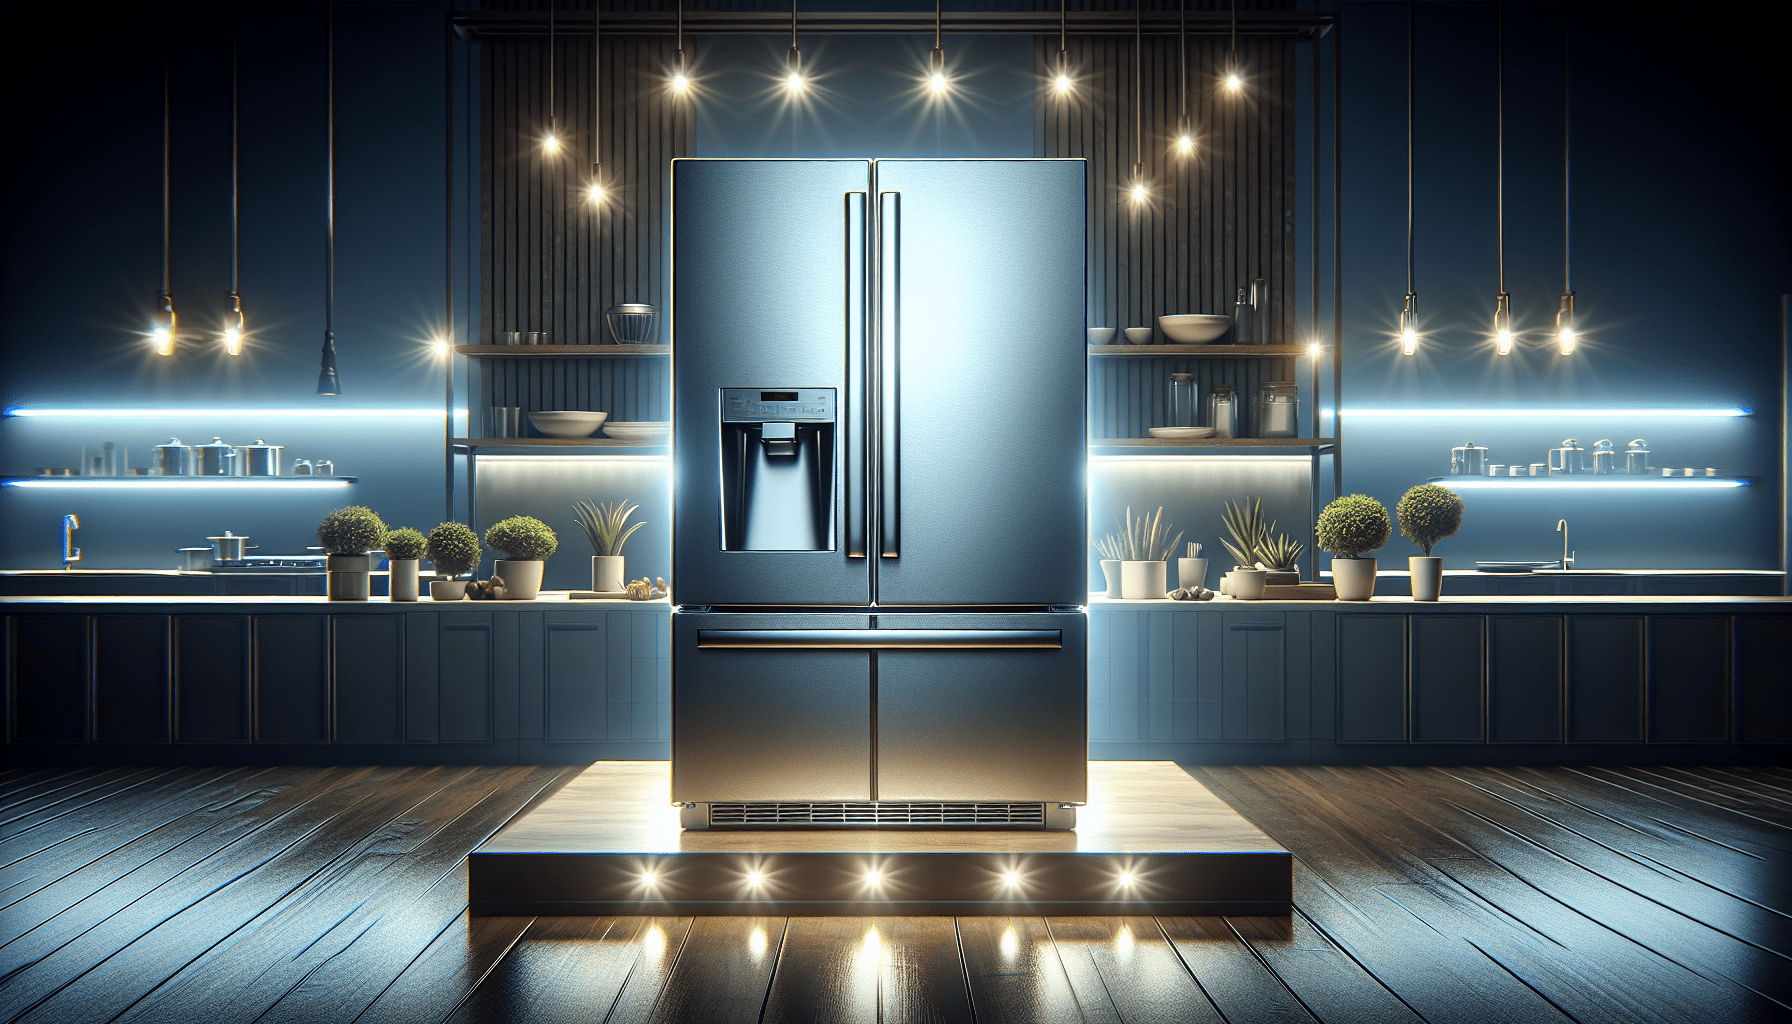 What Is The #1 Appliance Brand?